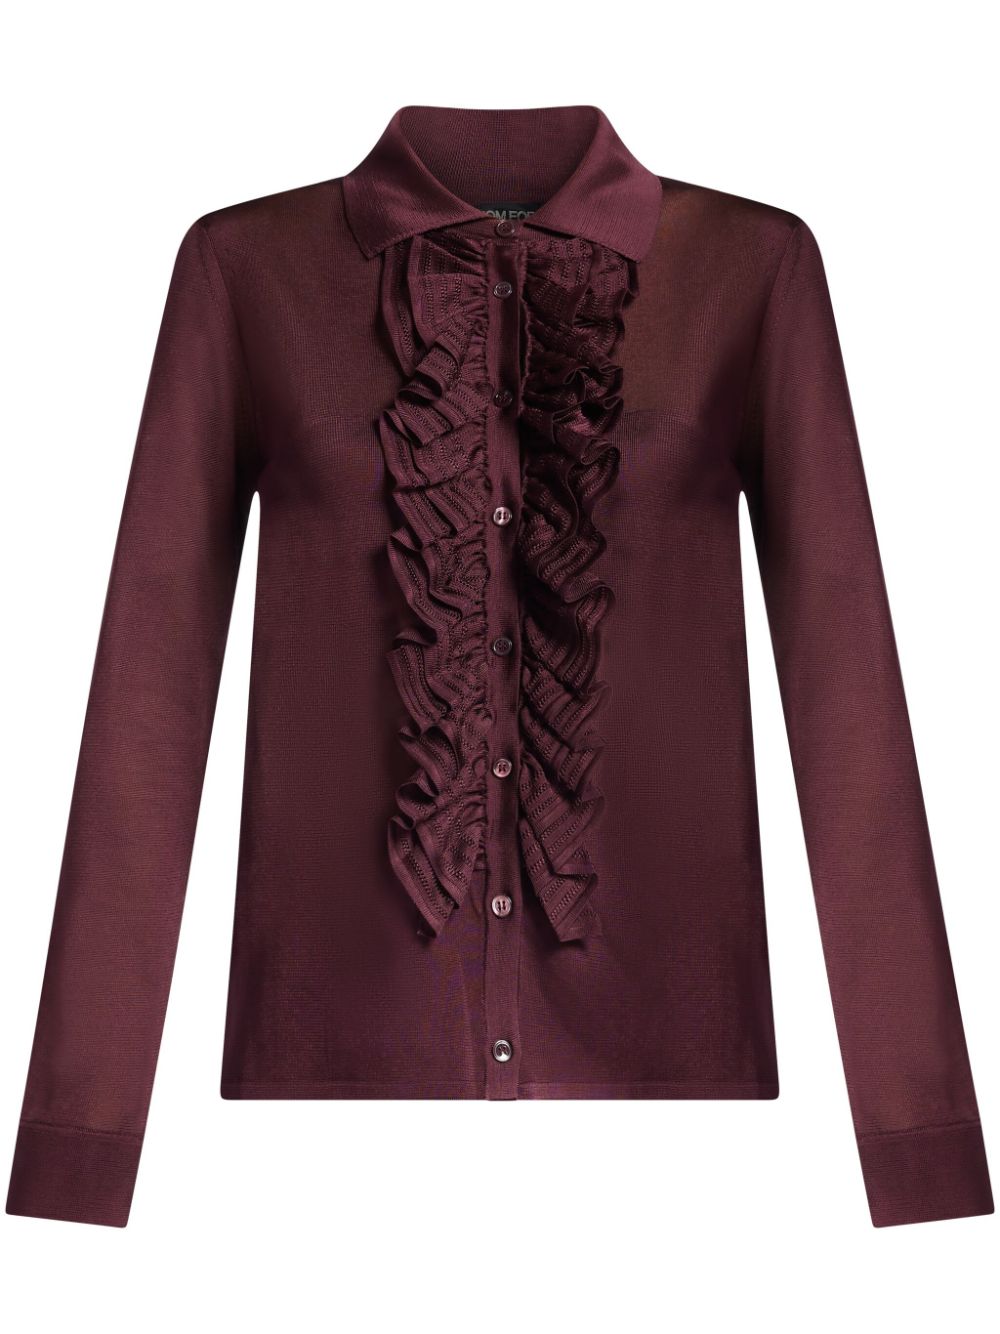 TOM FORD ruffle-embellished fine-knit shirt - Red von TOM FORD